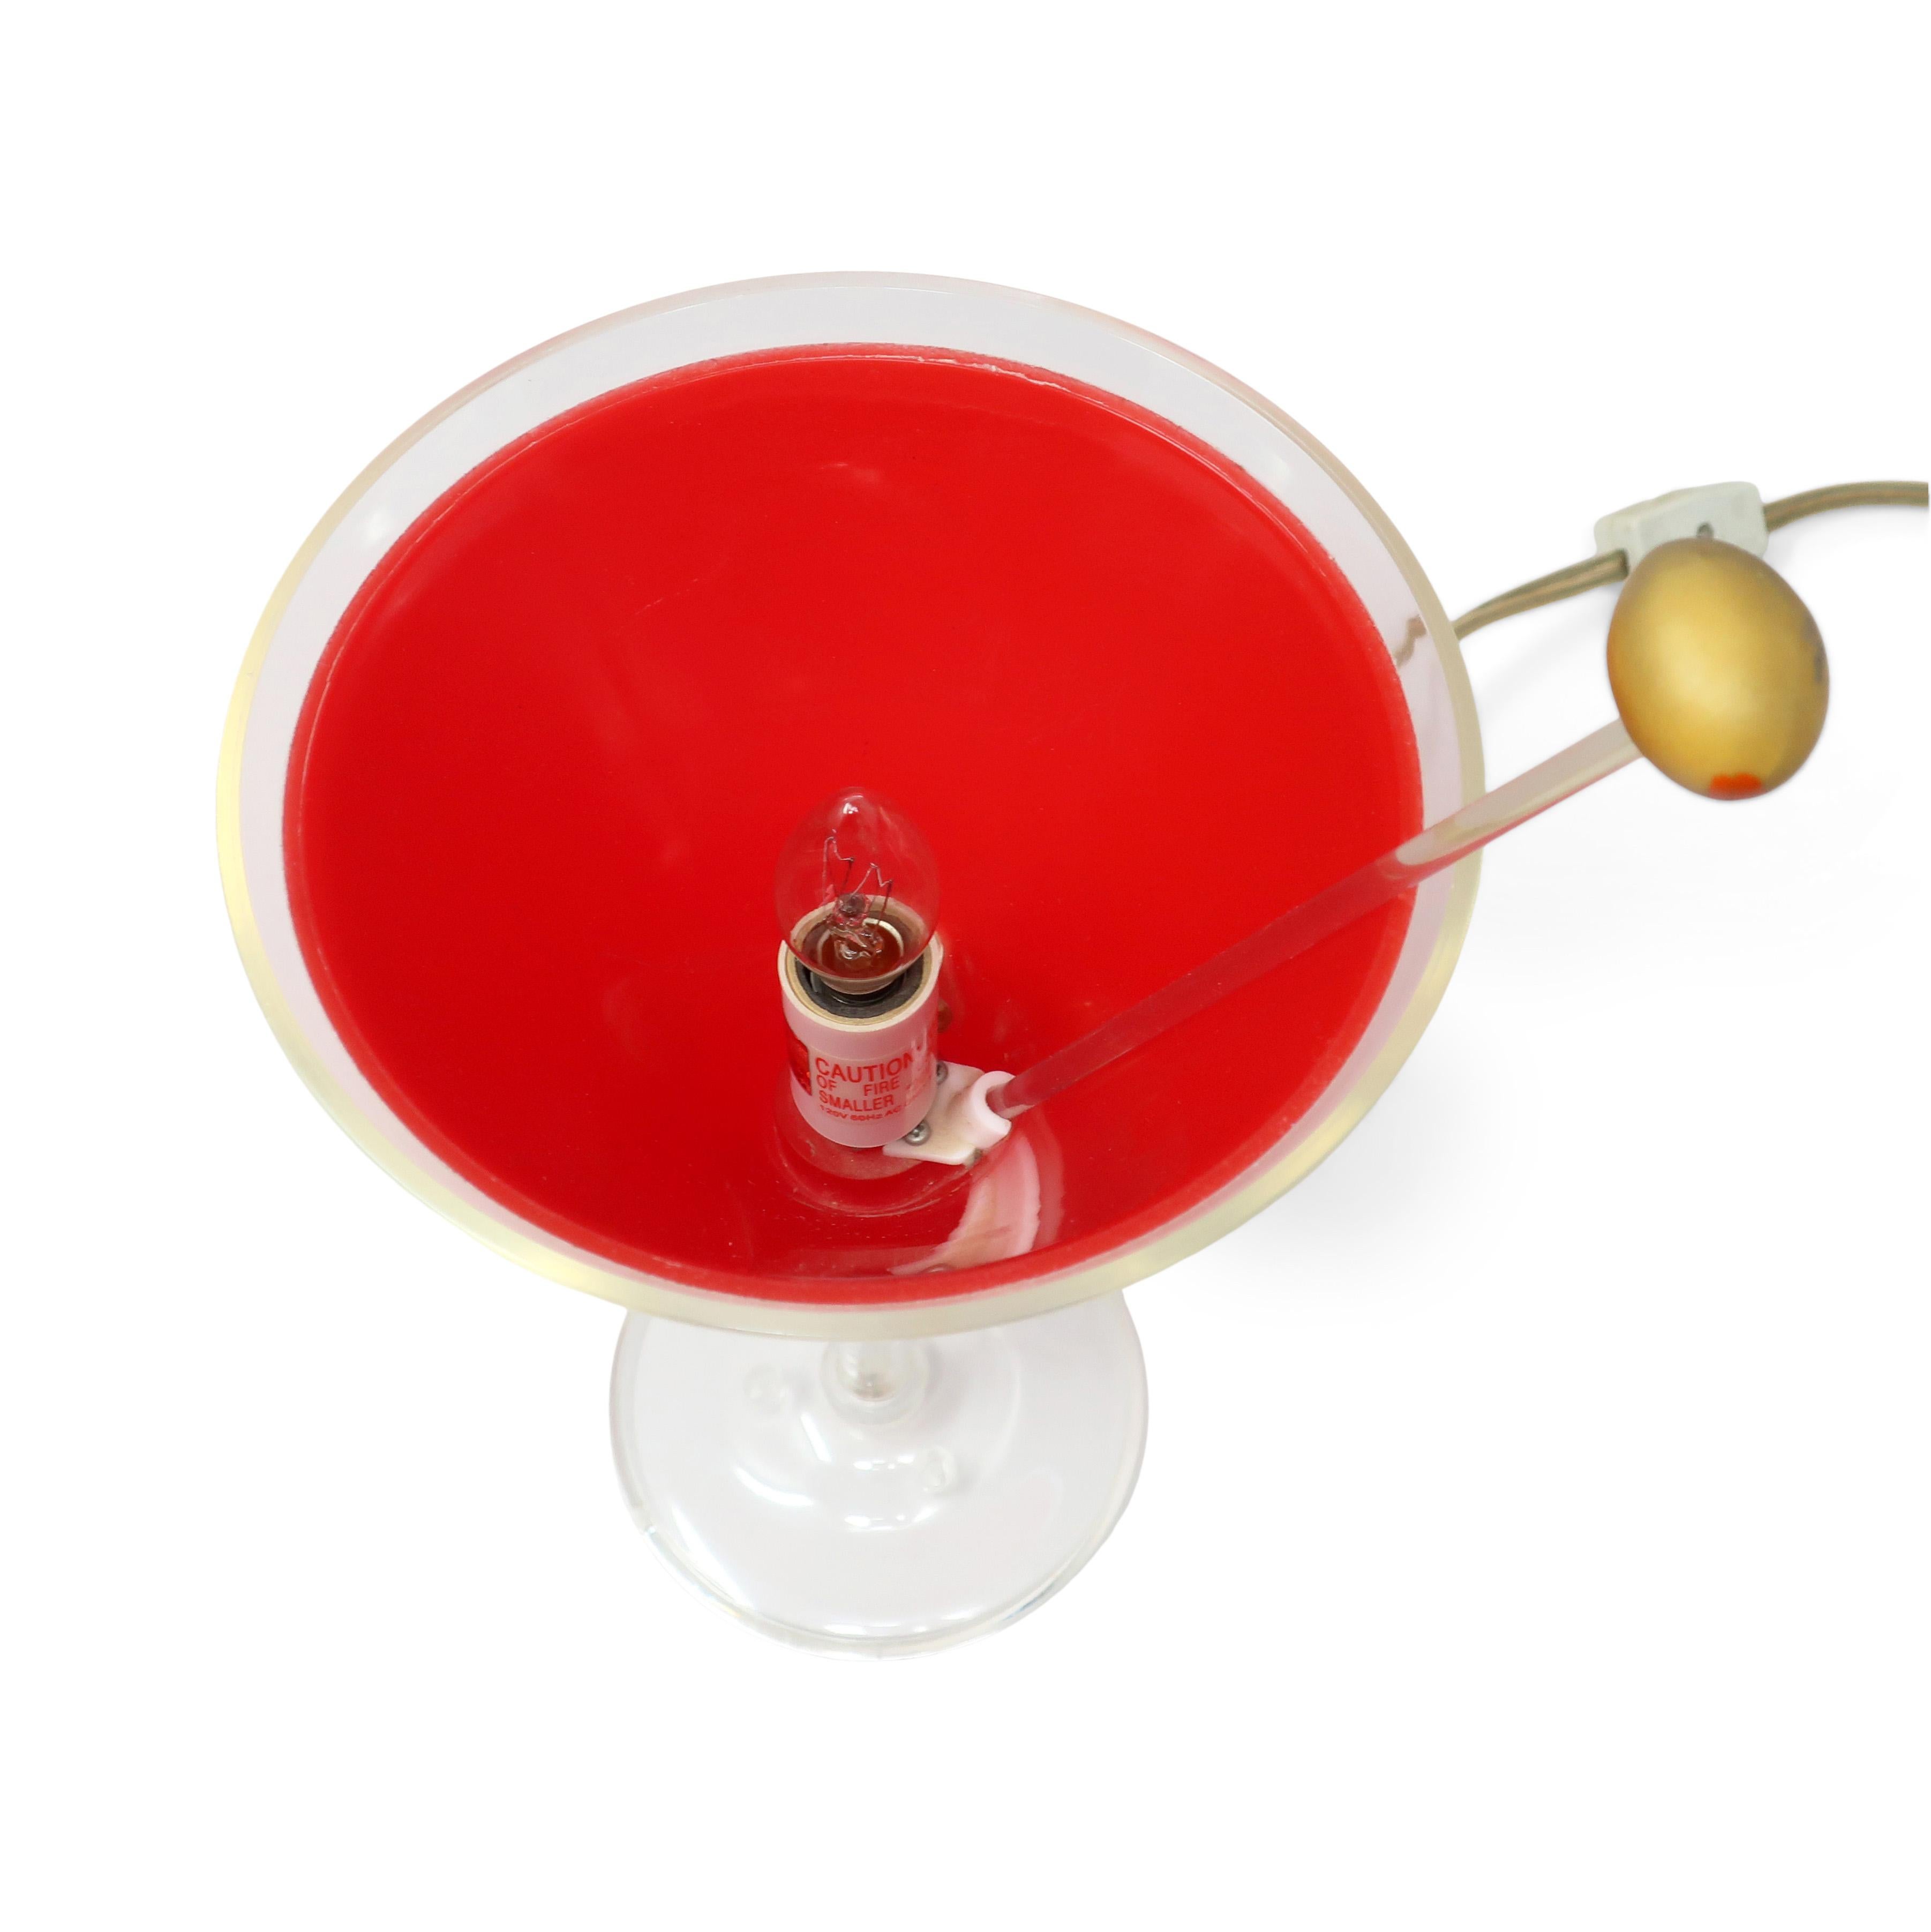 Plastic Vintage Red Lucite Martini Lamp For Sale